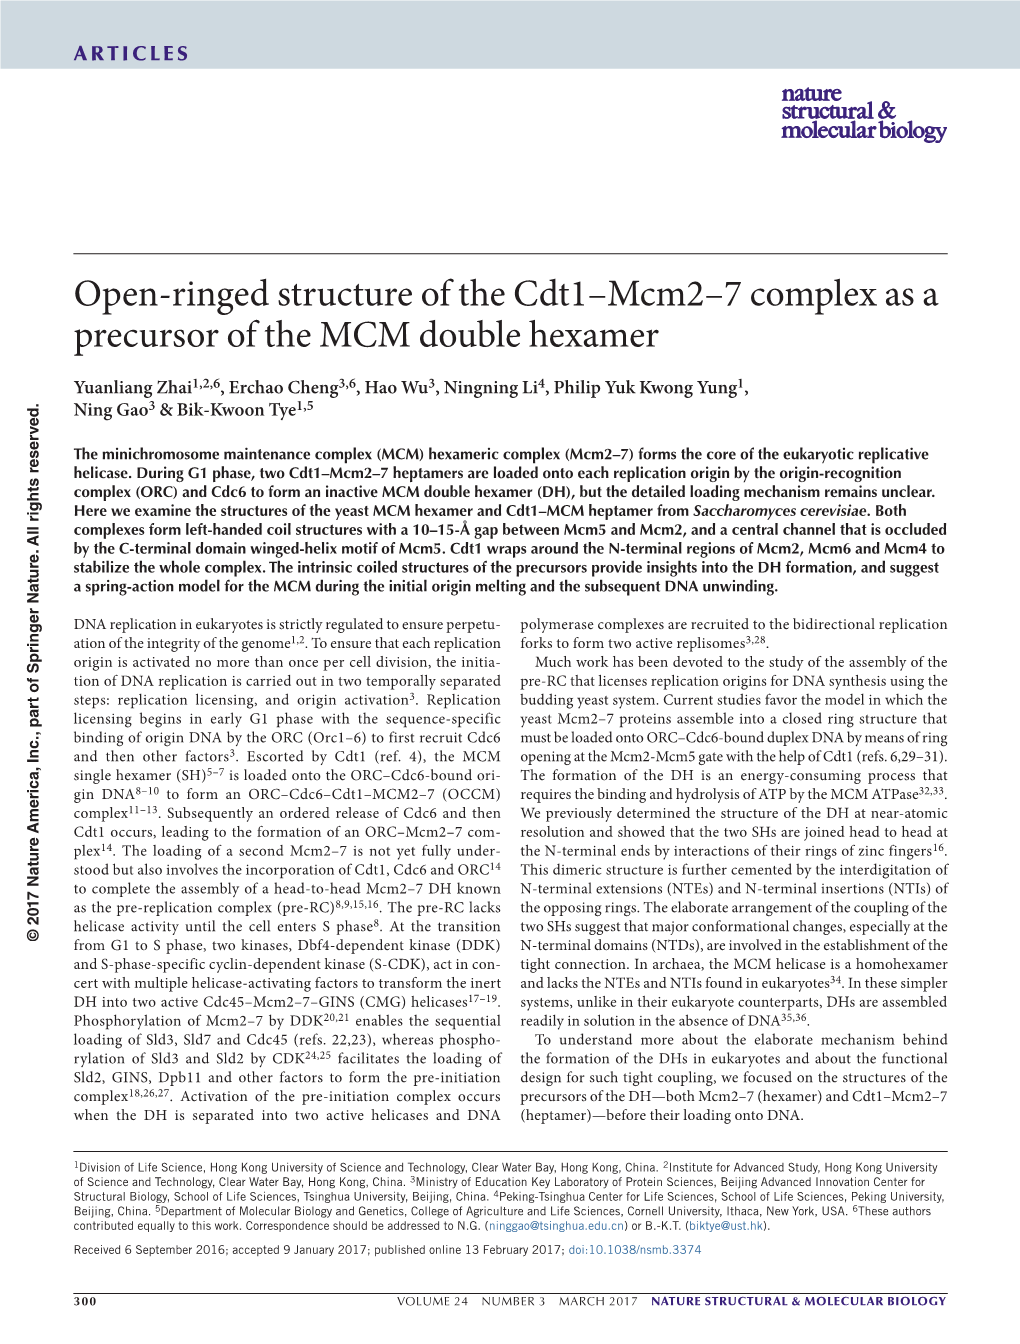 Open-Ringed Structure of the Cdt1–Mcm2–7 Complex As a Precursor of the MCM Double Hexamer